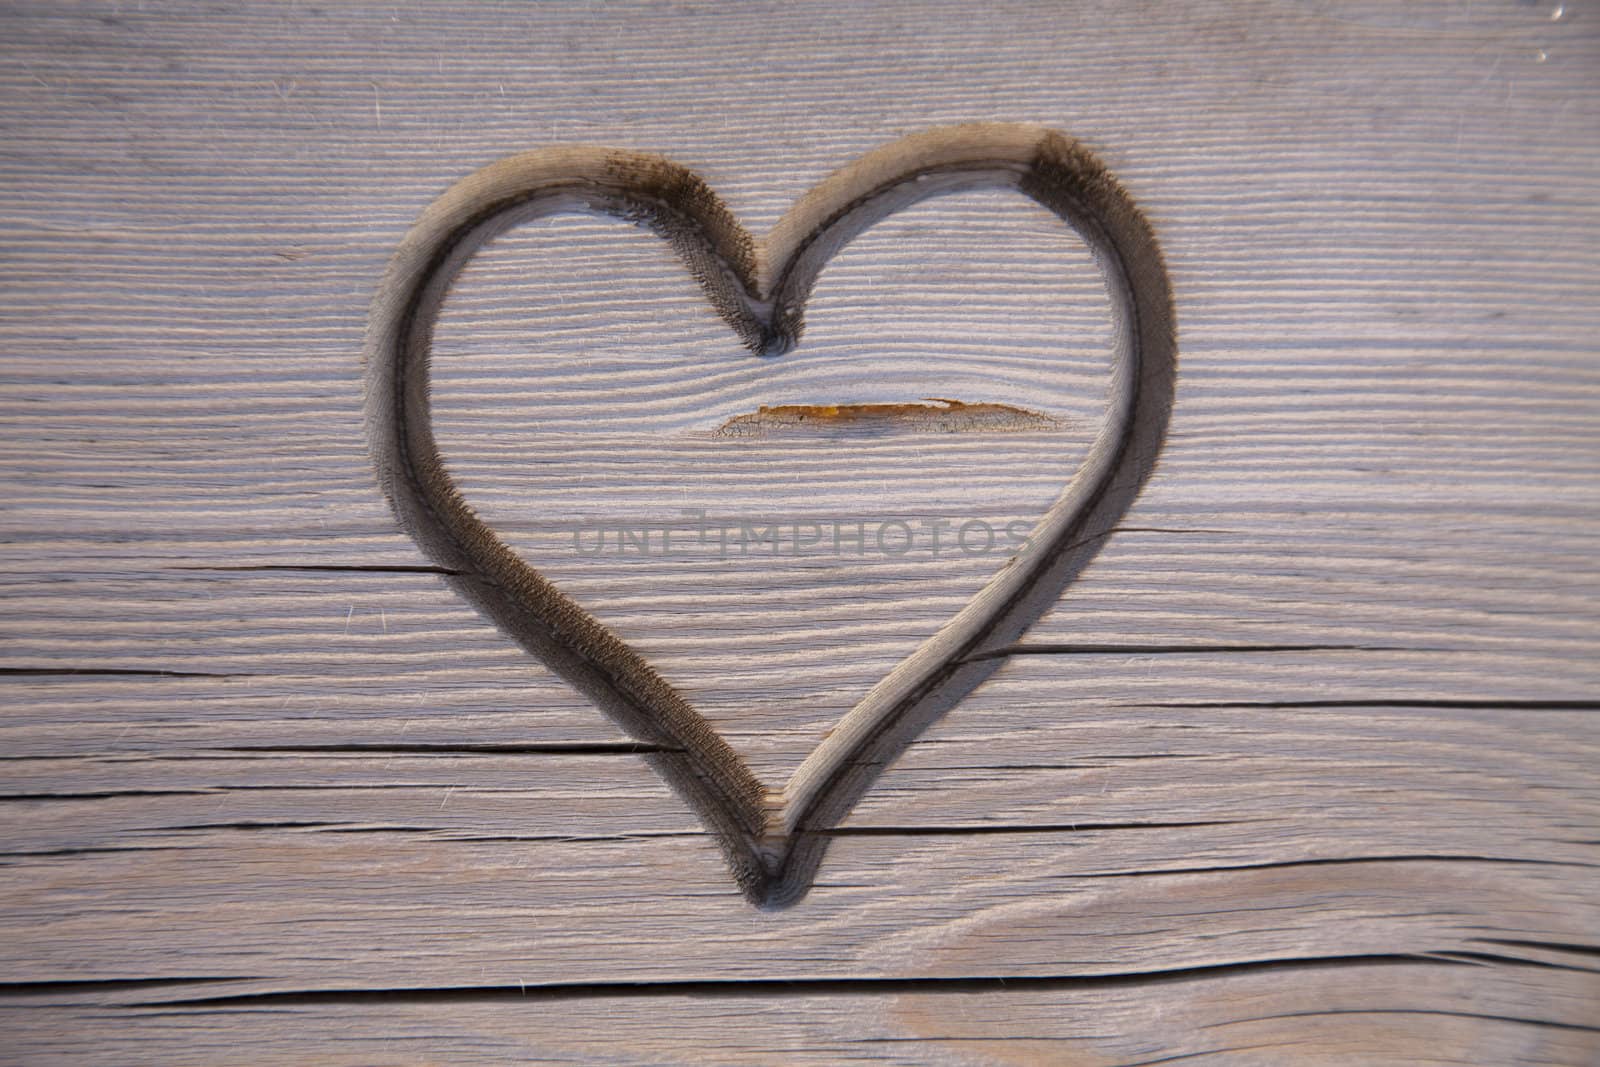 Perfect heart carved in a wooden park bench